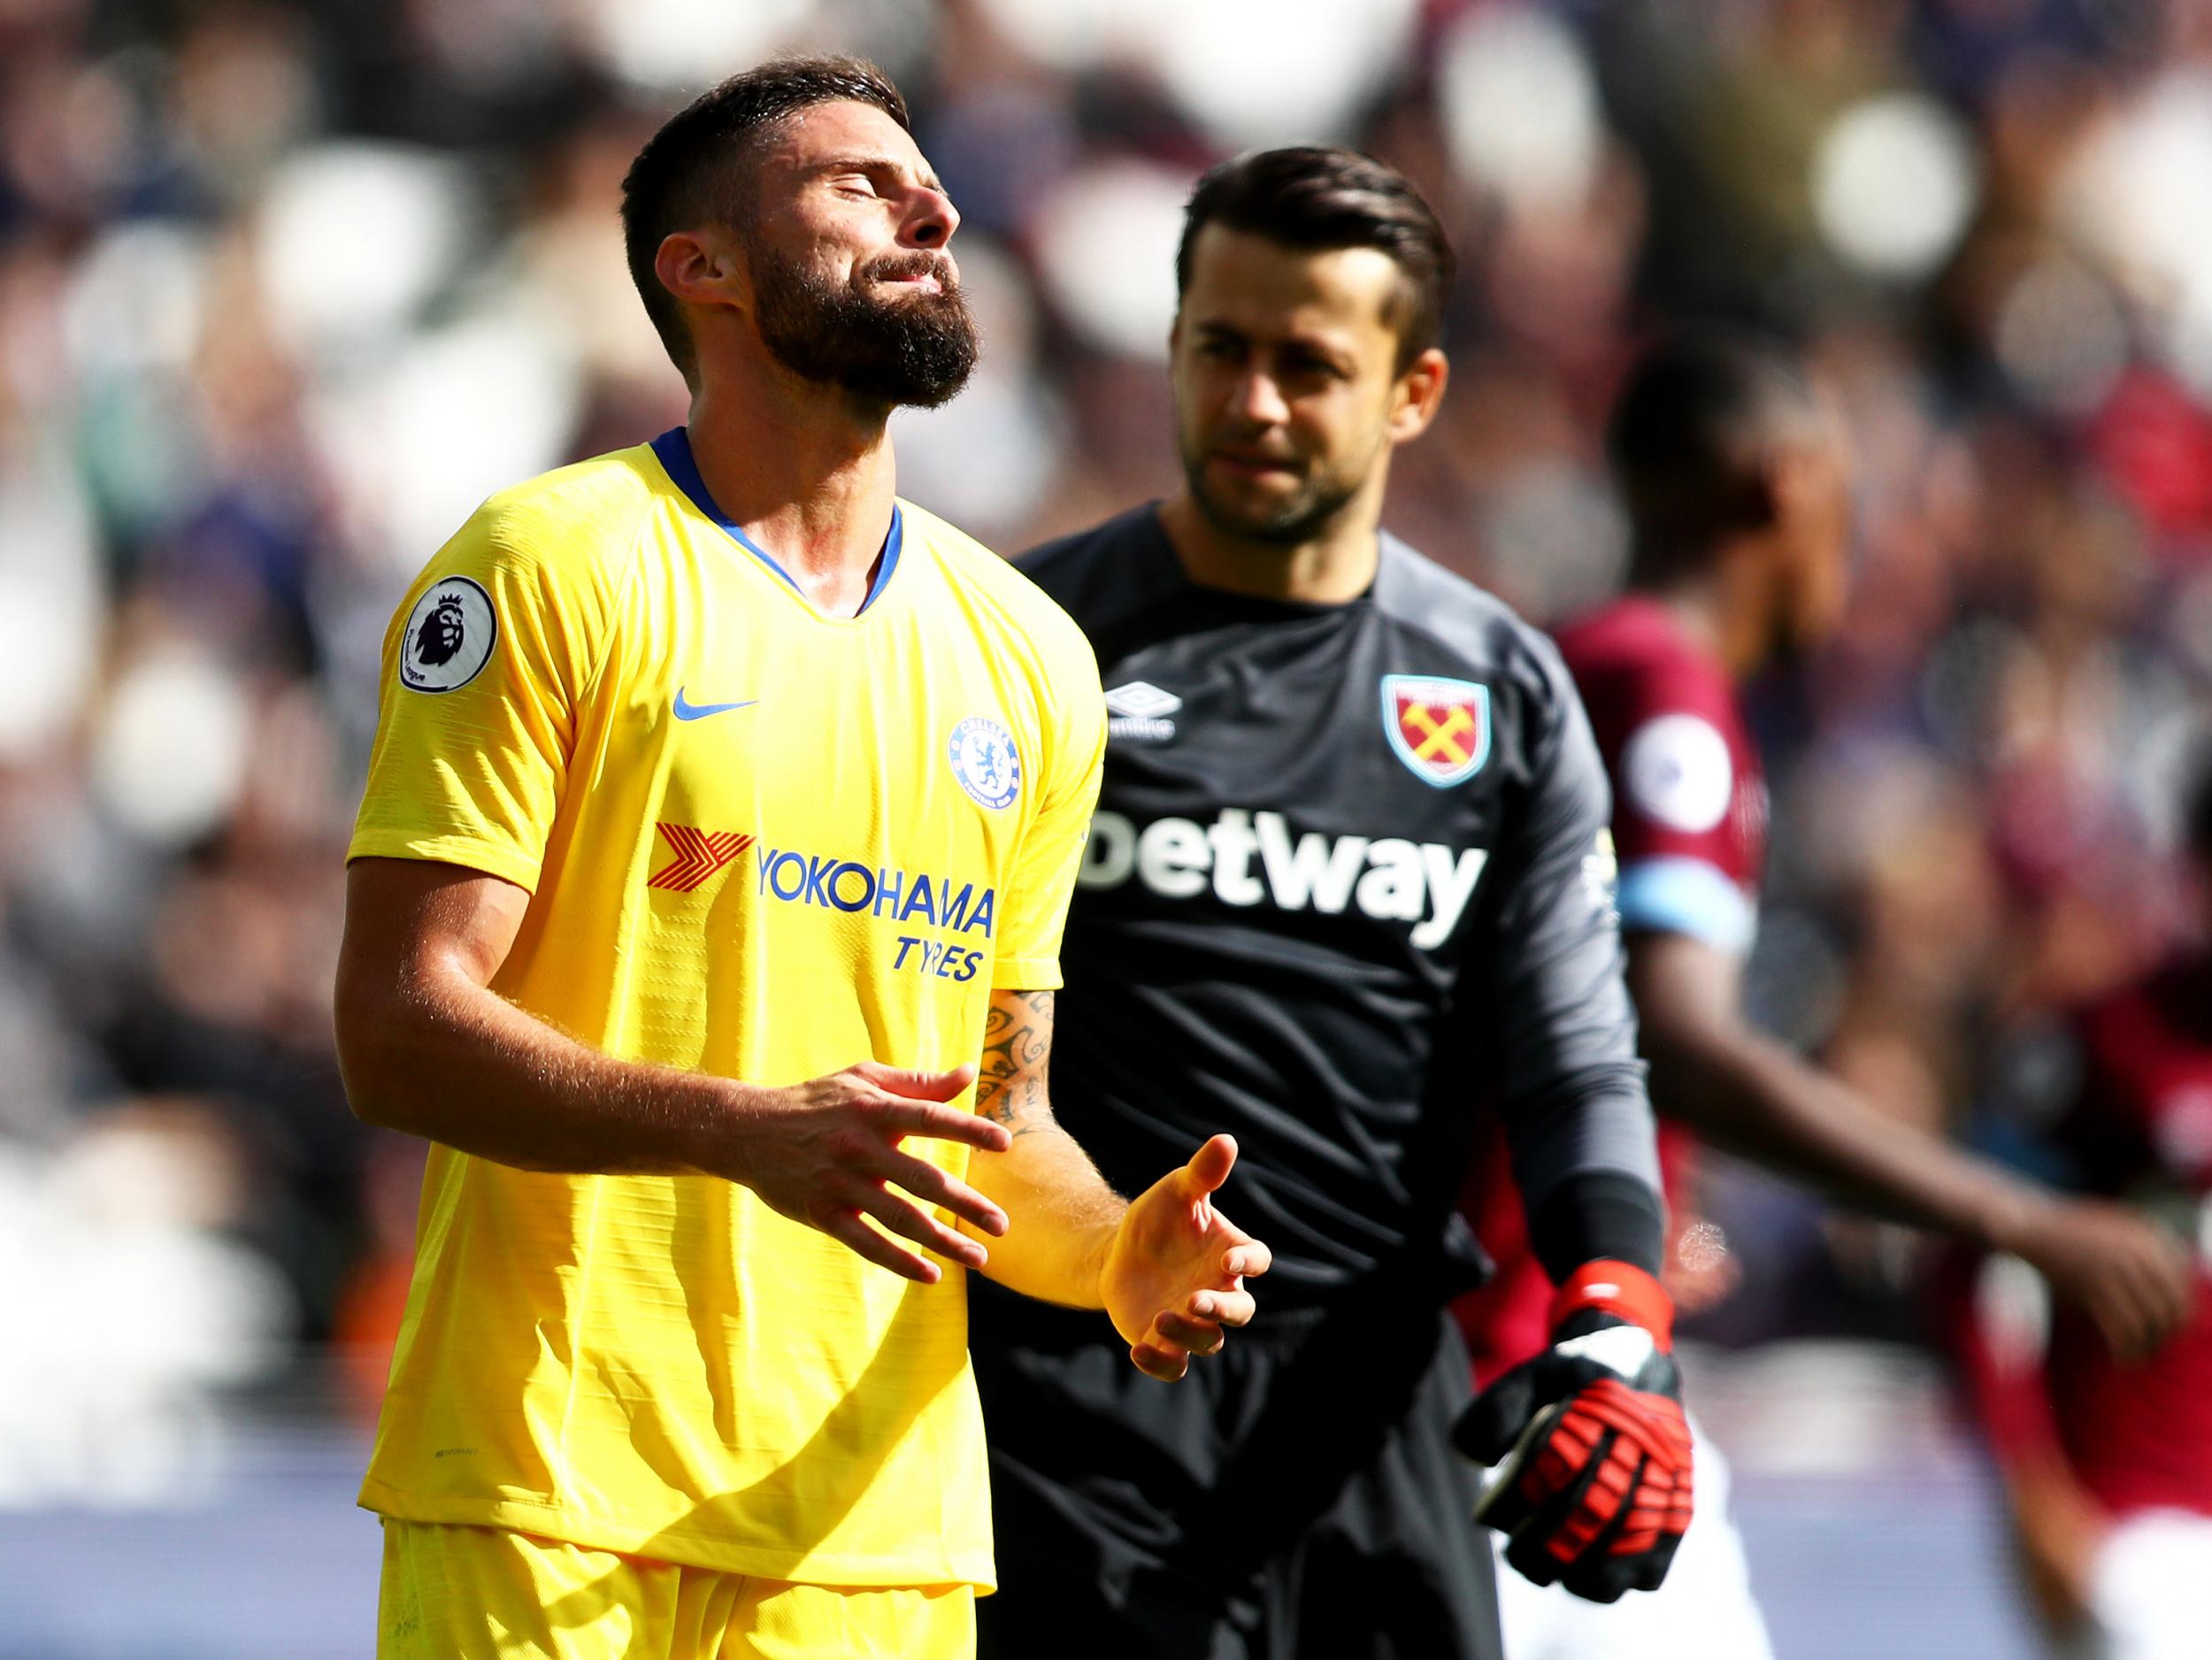 Chelsea draw a blank against West Ham as winning streak comes to an end